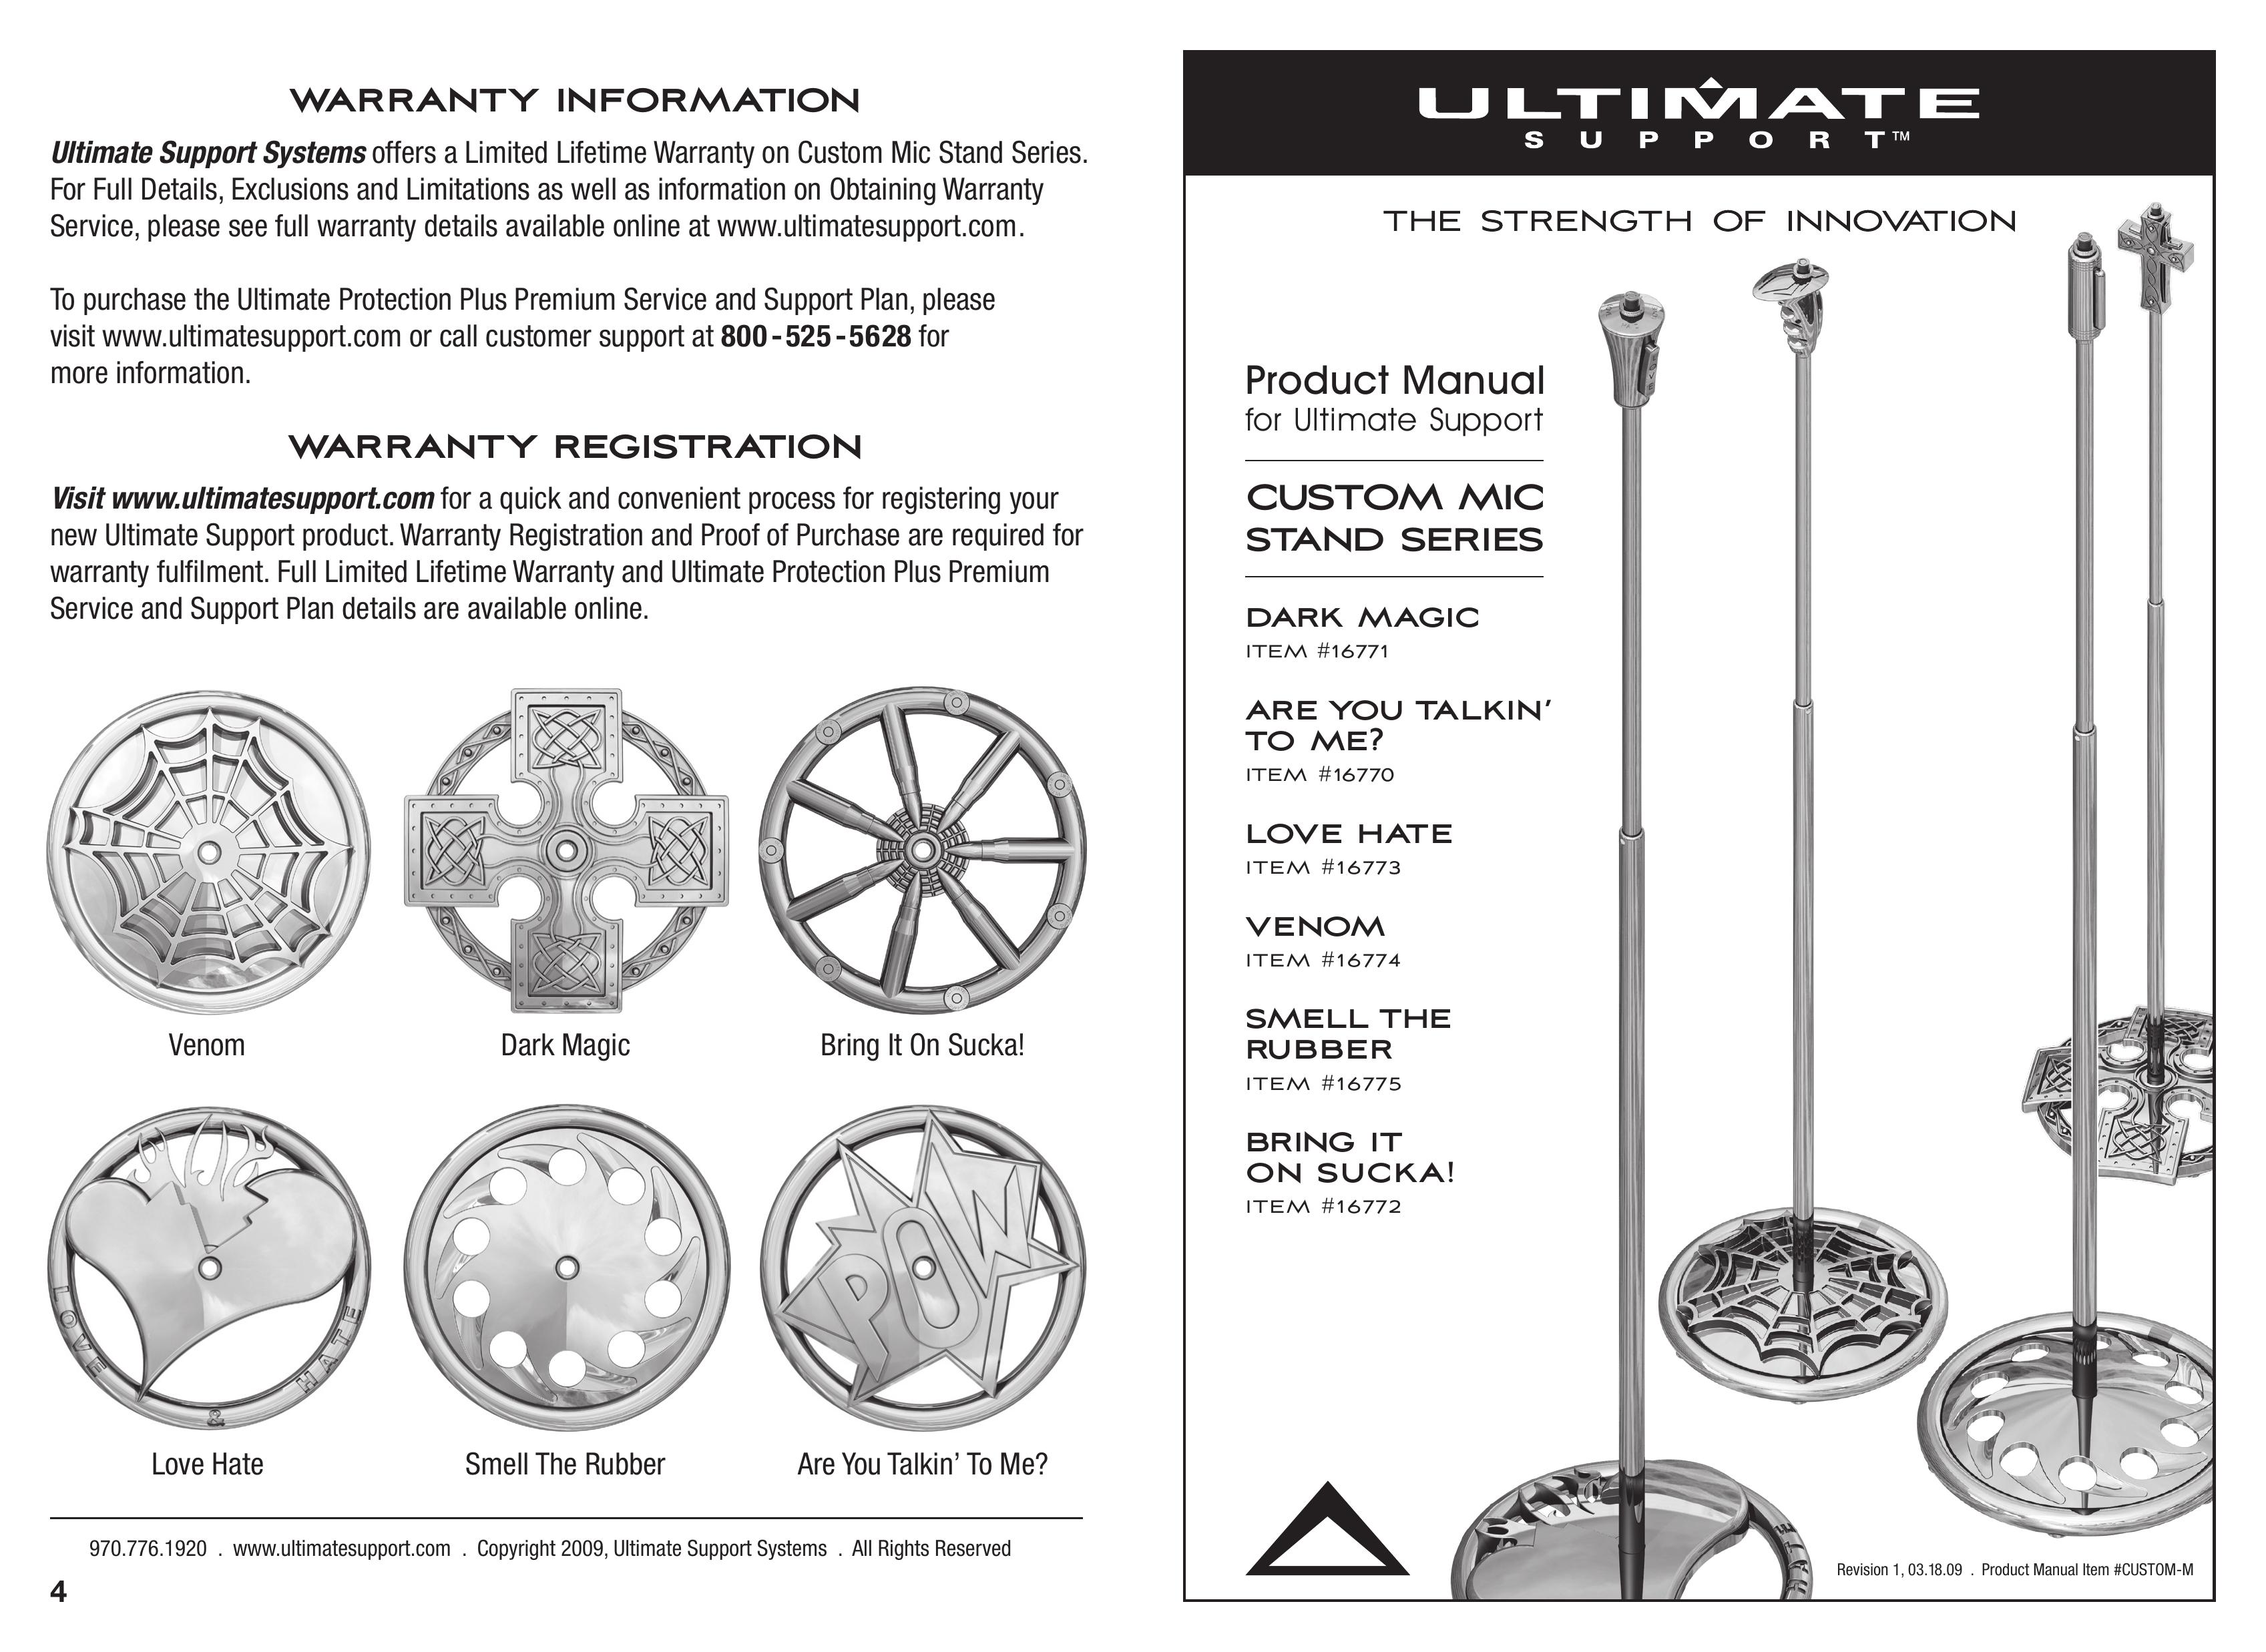 Ultimate Support Systems 16771 Microphone User Manual